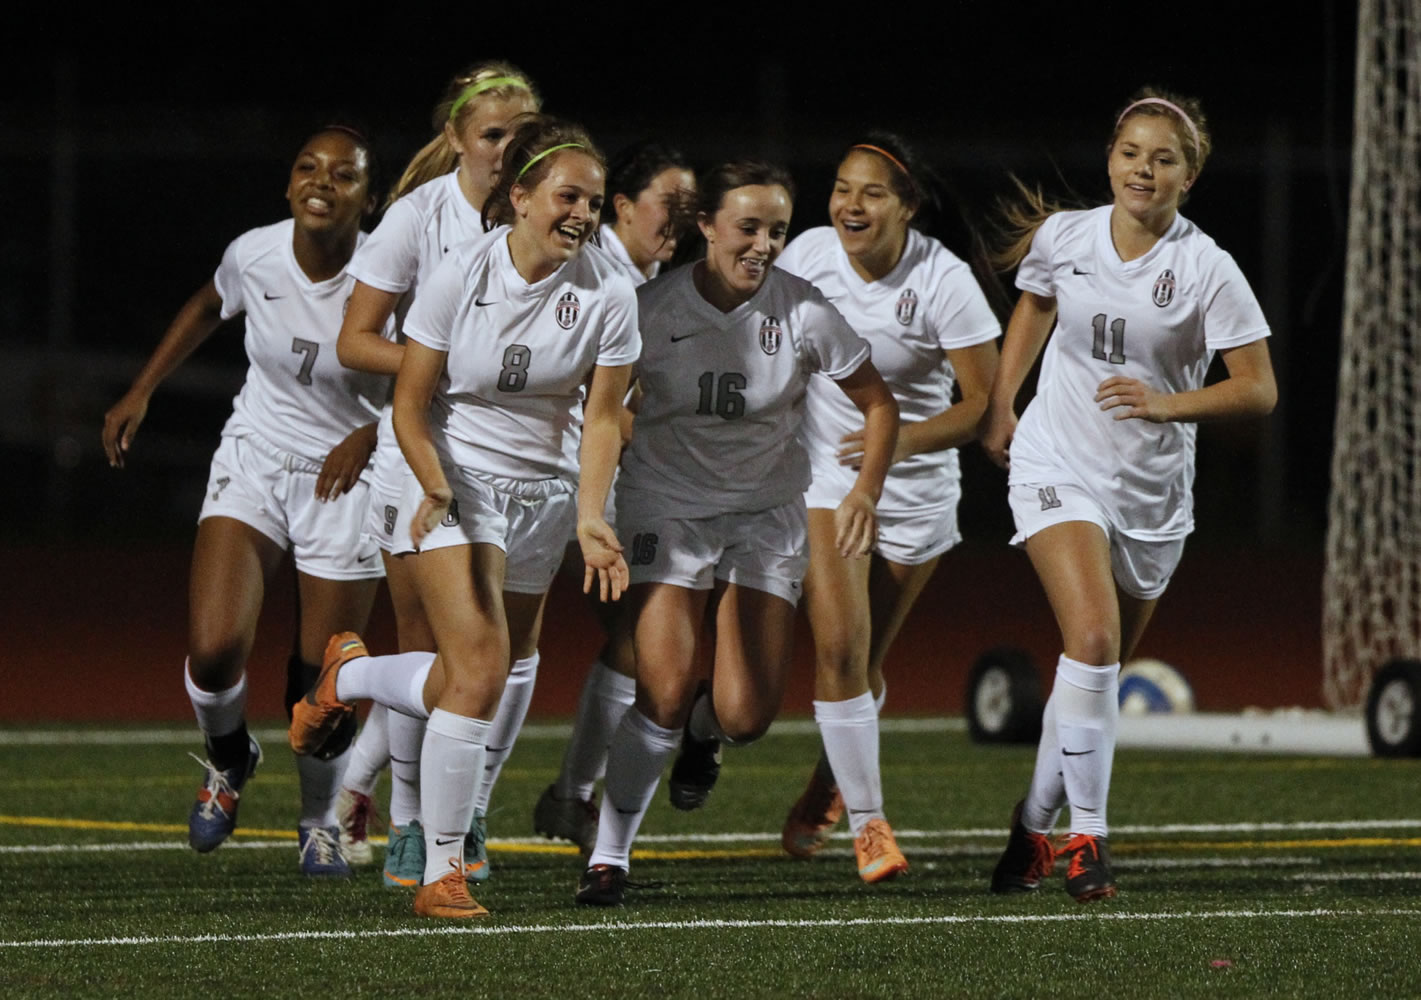 Union midfielder Melissa Foster (8) celebrates with her Titans teammates after scoring against Camas.